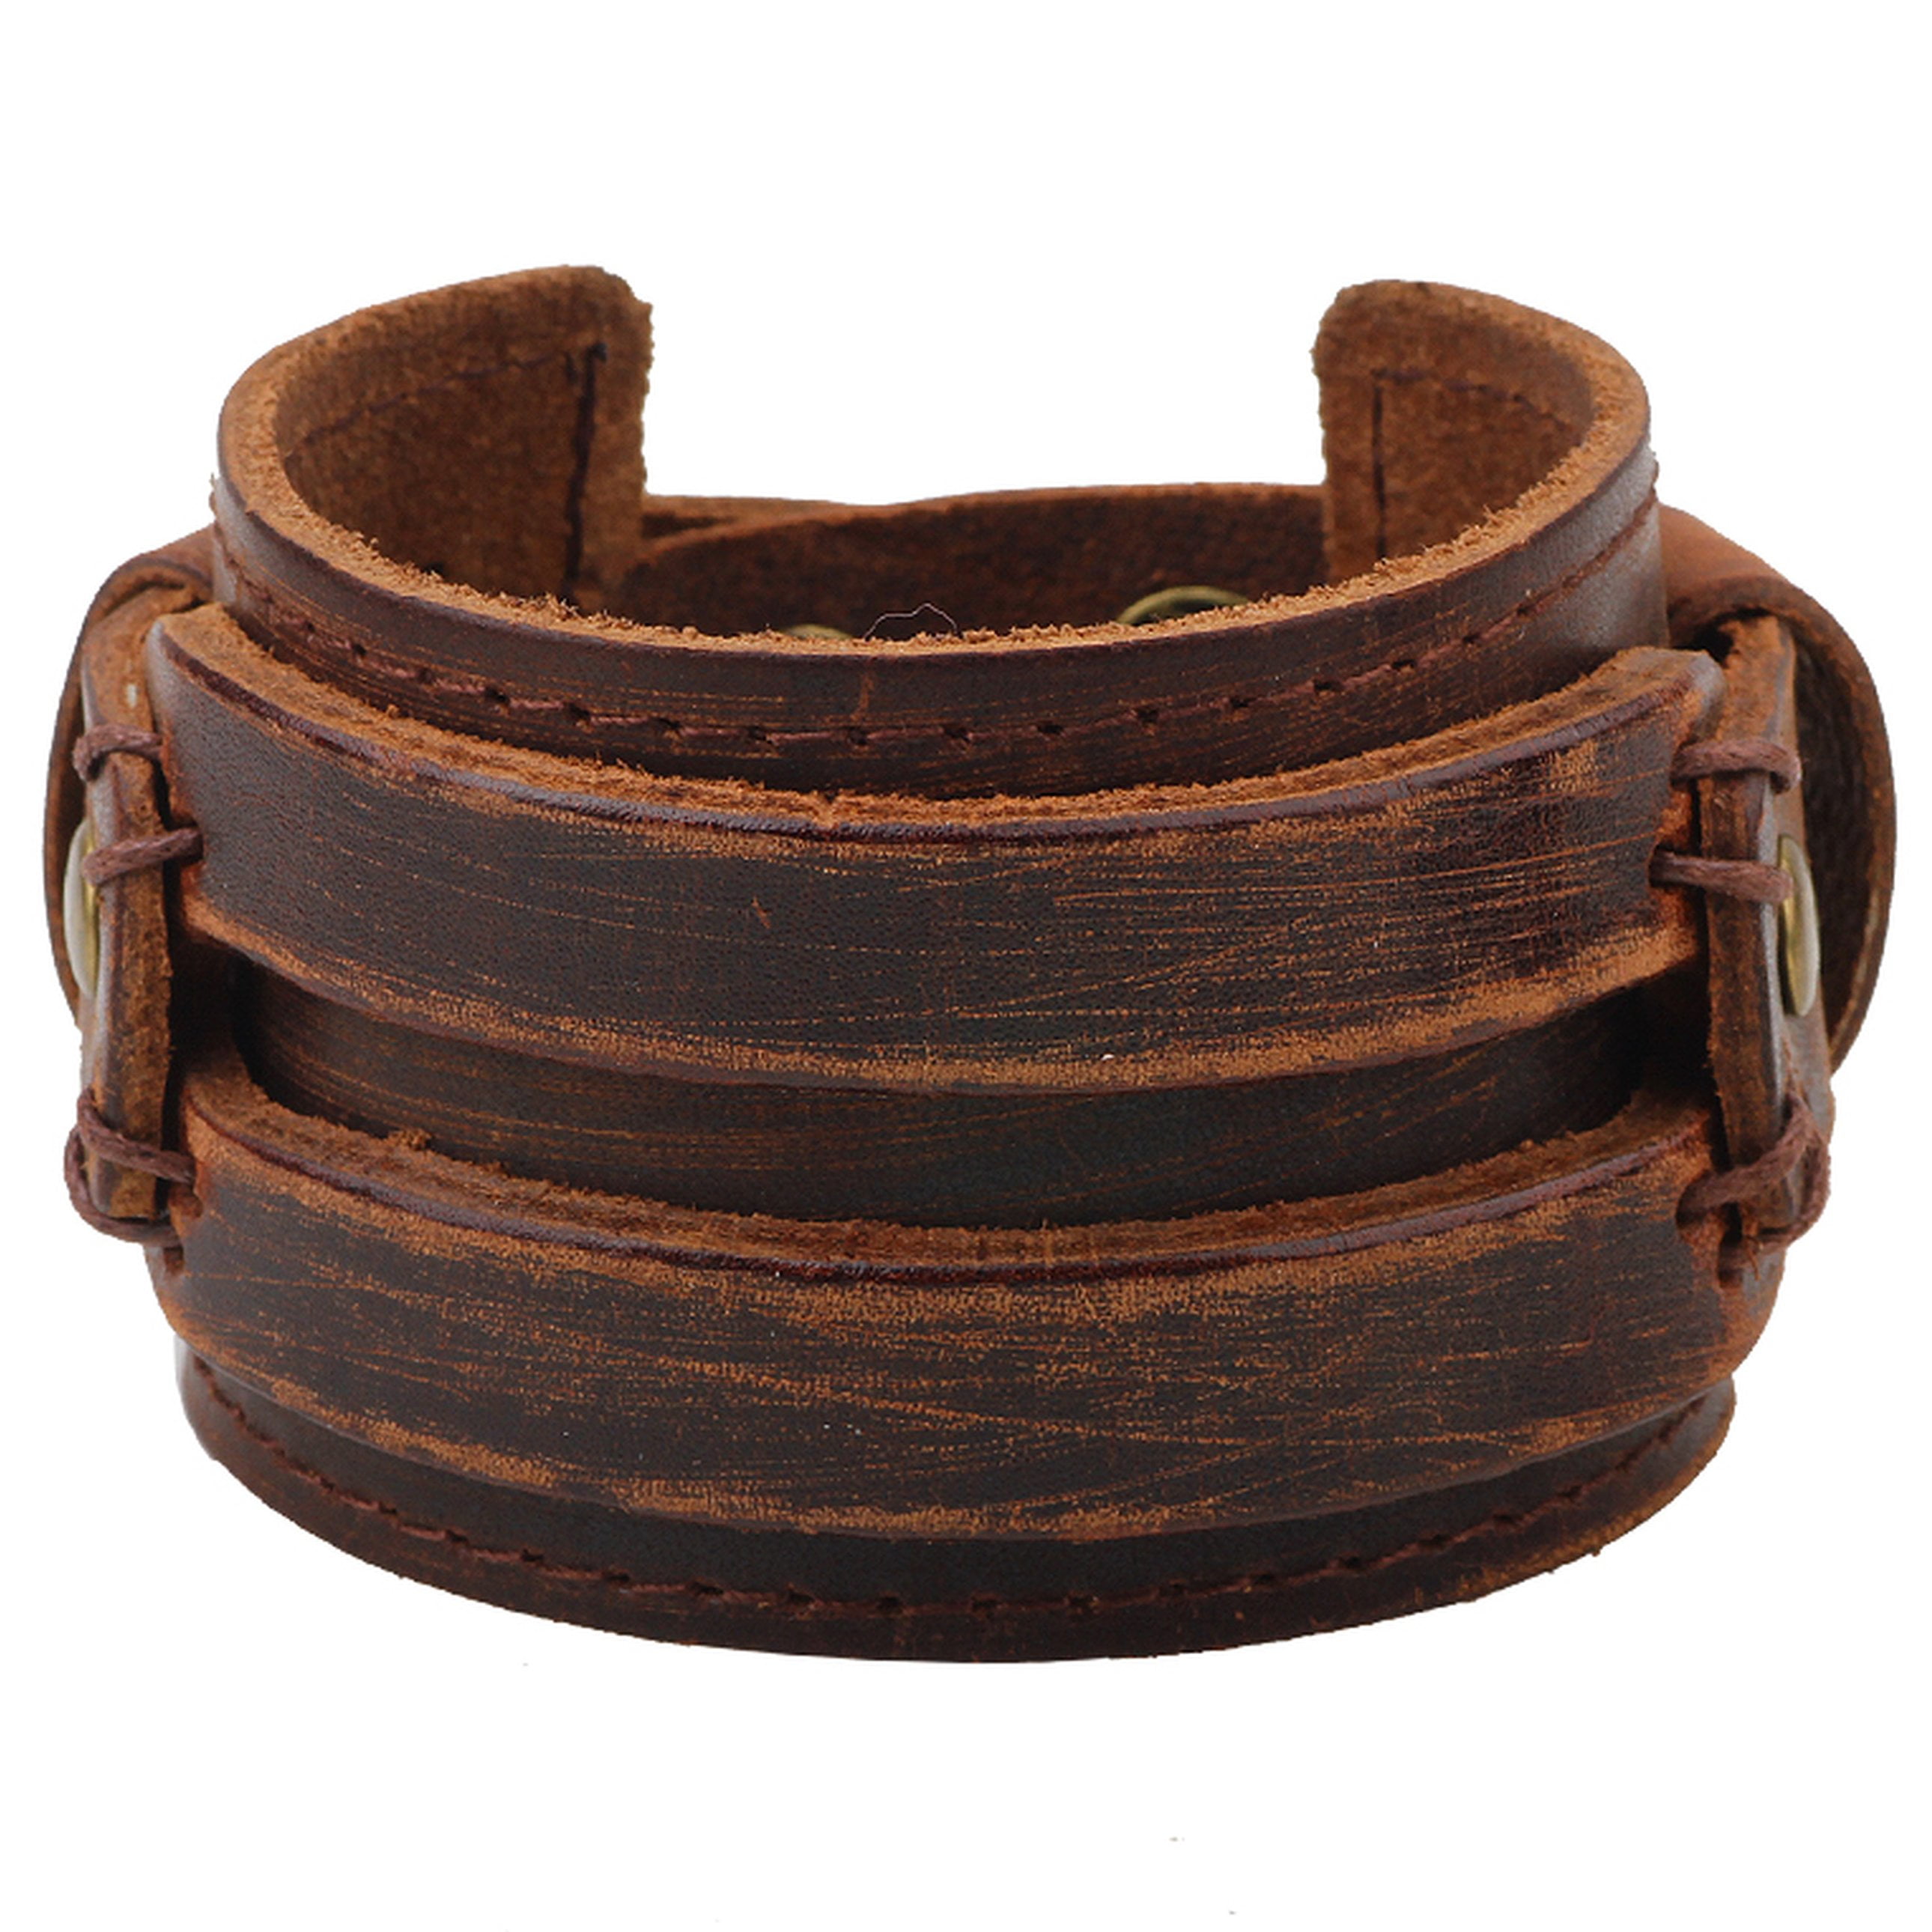 Details about   Punk Mens Wide Leather Bracelet Bangle Wristband Adjustable Cuff Wrap Jewelry 